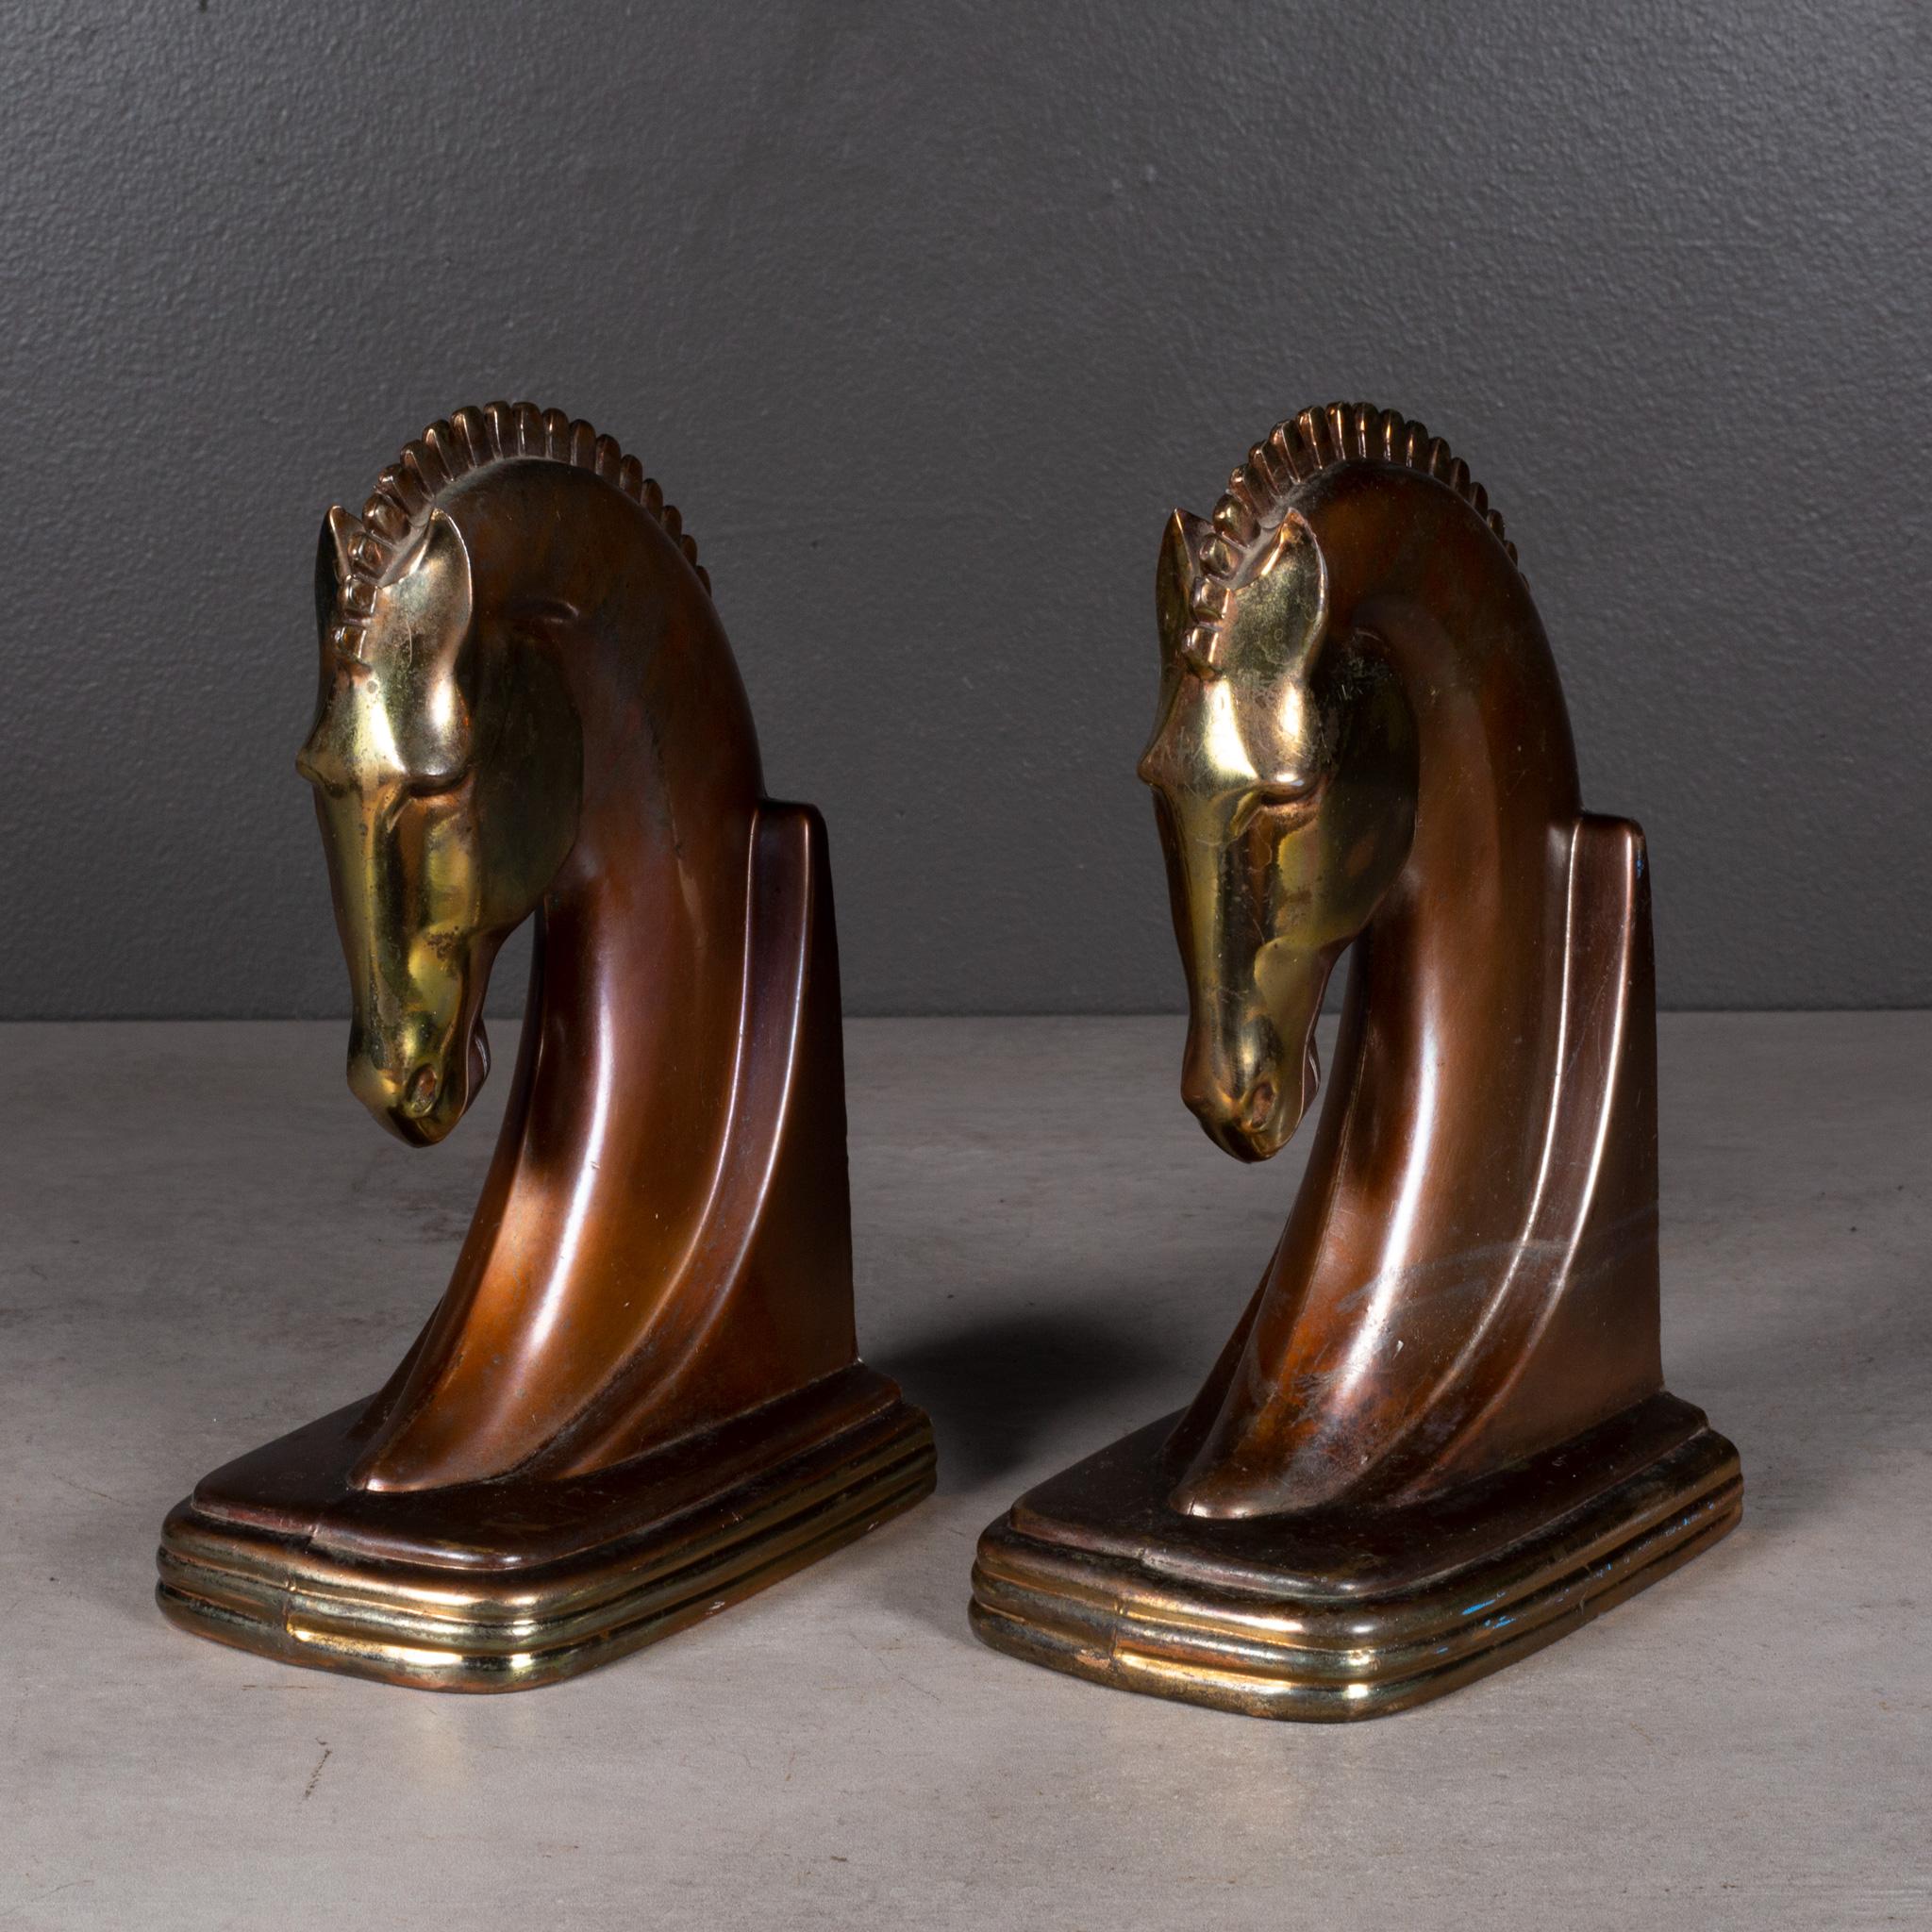 ABOUT

An original pair of Art Deco Trojan horse bookends manufactured by Dodge Trophy Inc. Los Angeles California USA. Both pieces have retained their original bronze and copper finish and are in good condition with appropriate patina for their